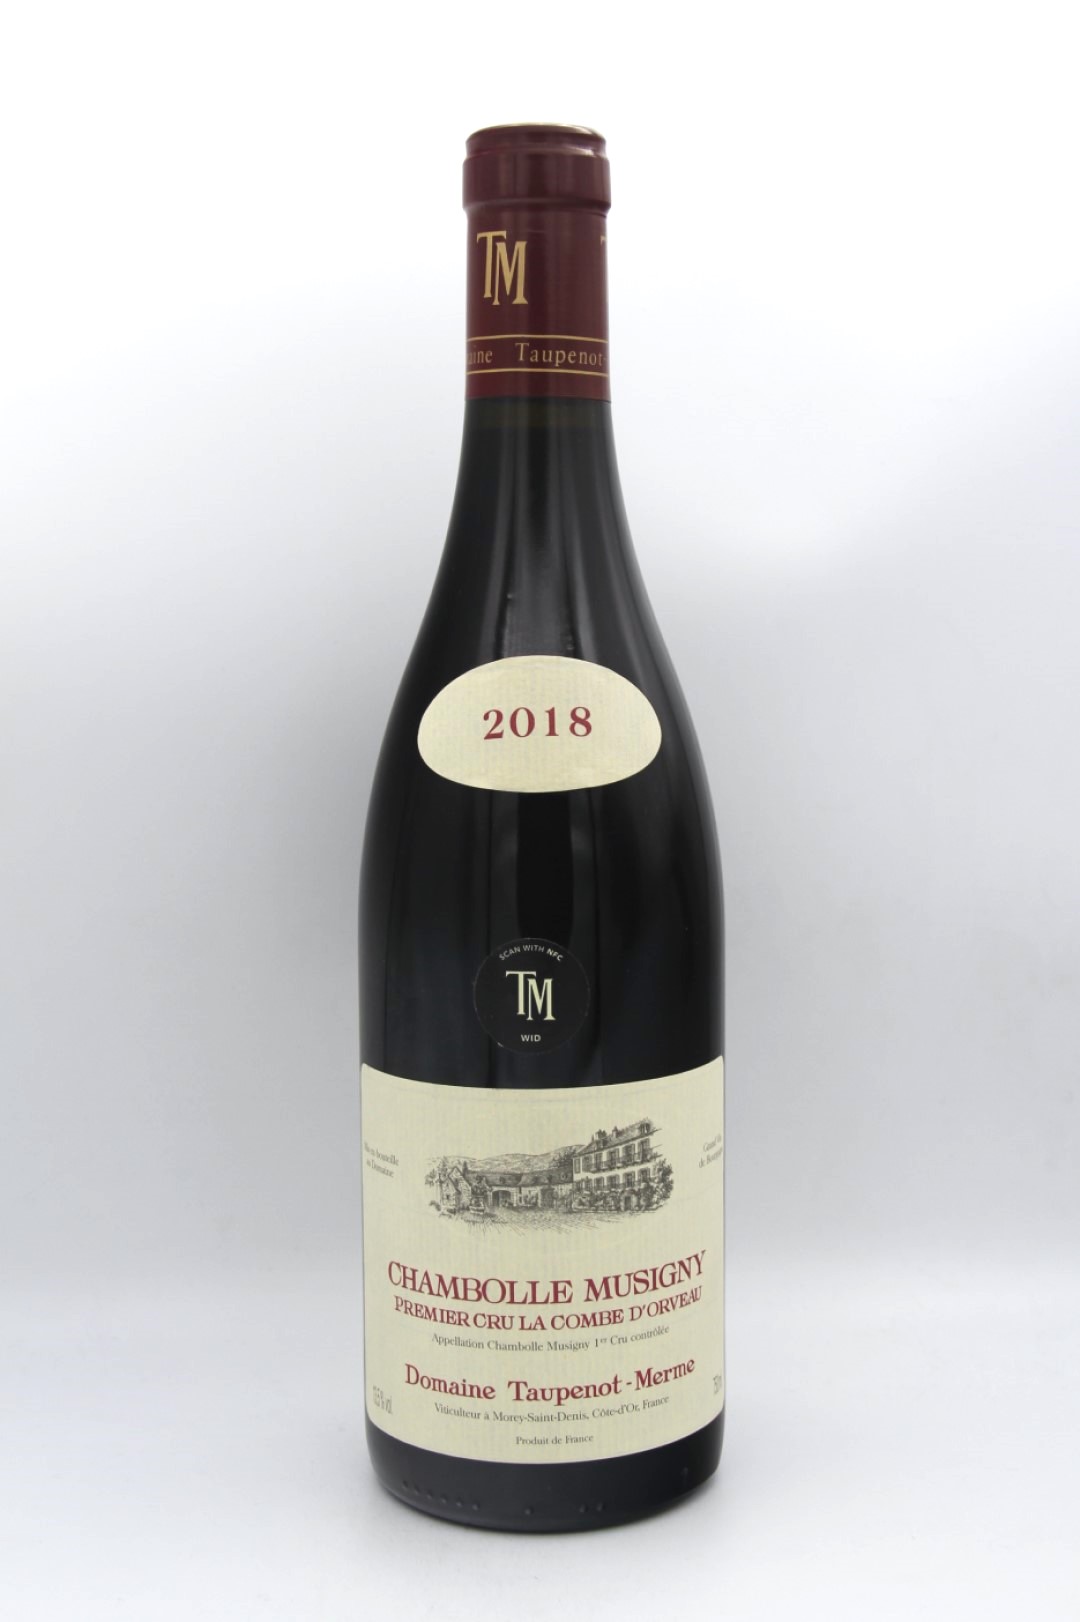 Domaine Taupenot-Merme Chambolle La Combe d'arveao